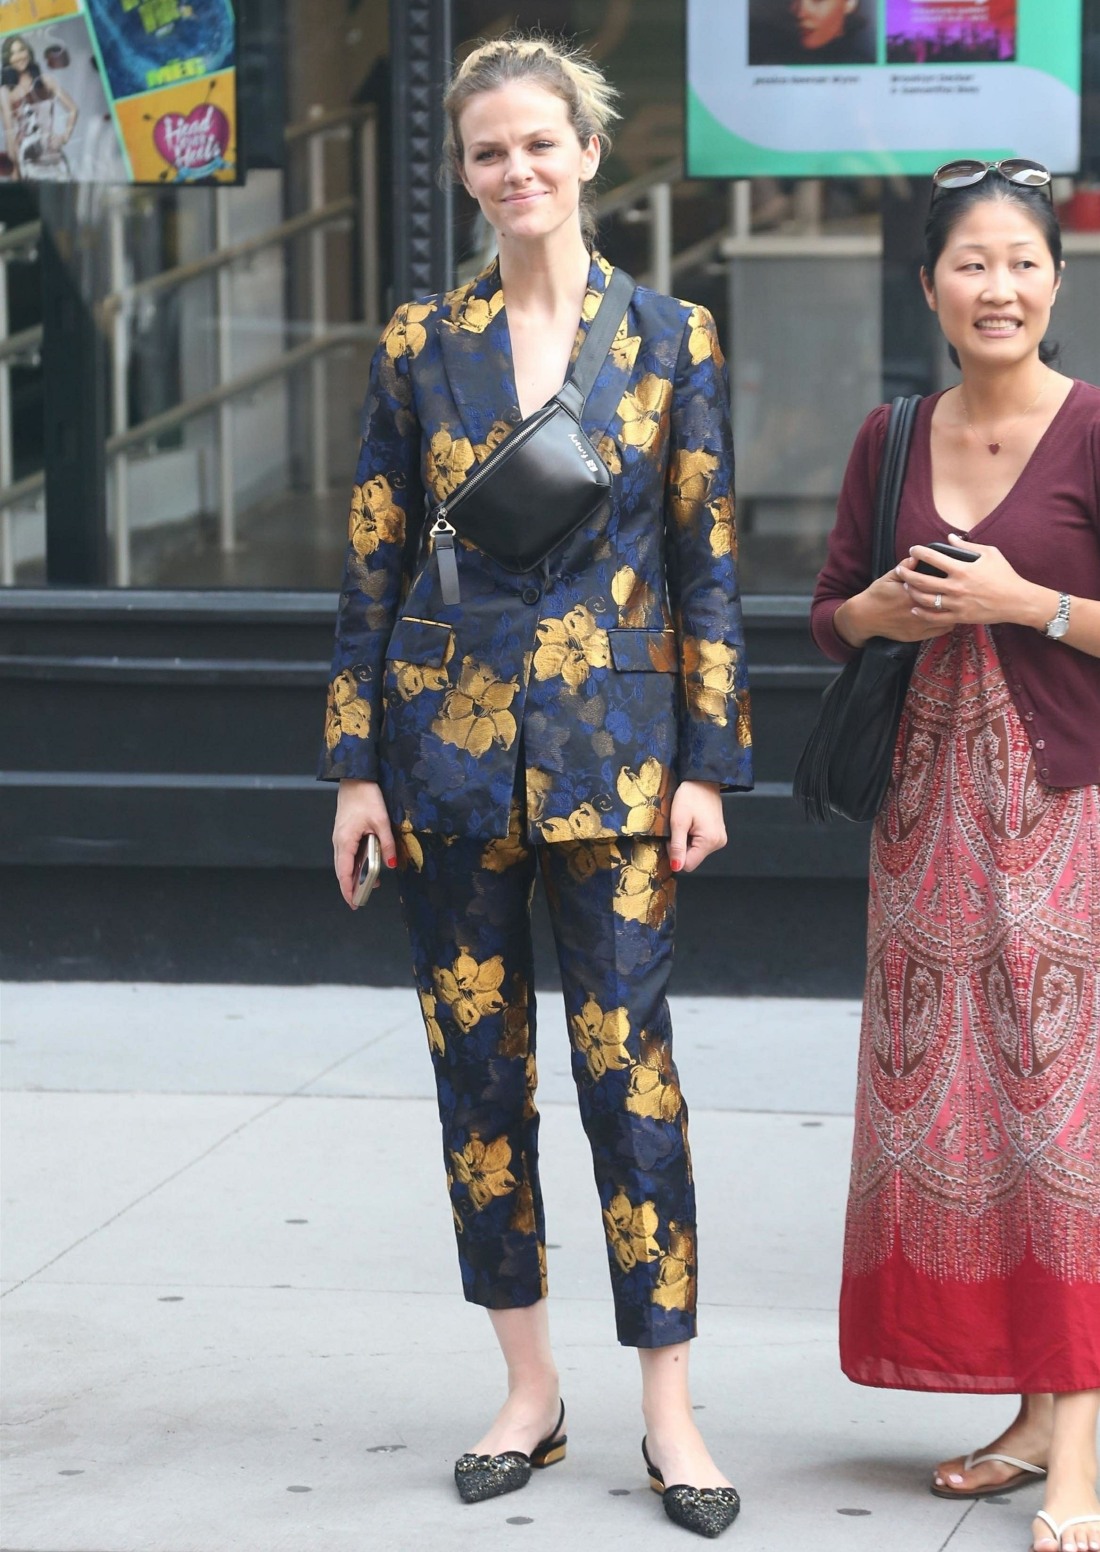 Brooklyn Decker rocks a floral print suit to the Build Series